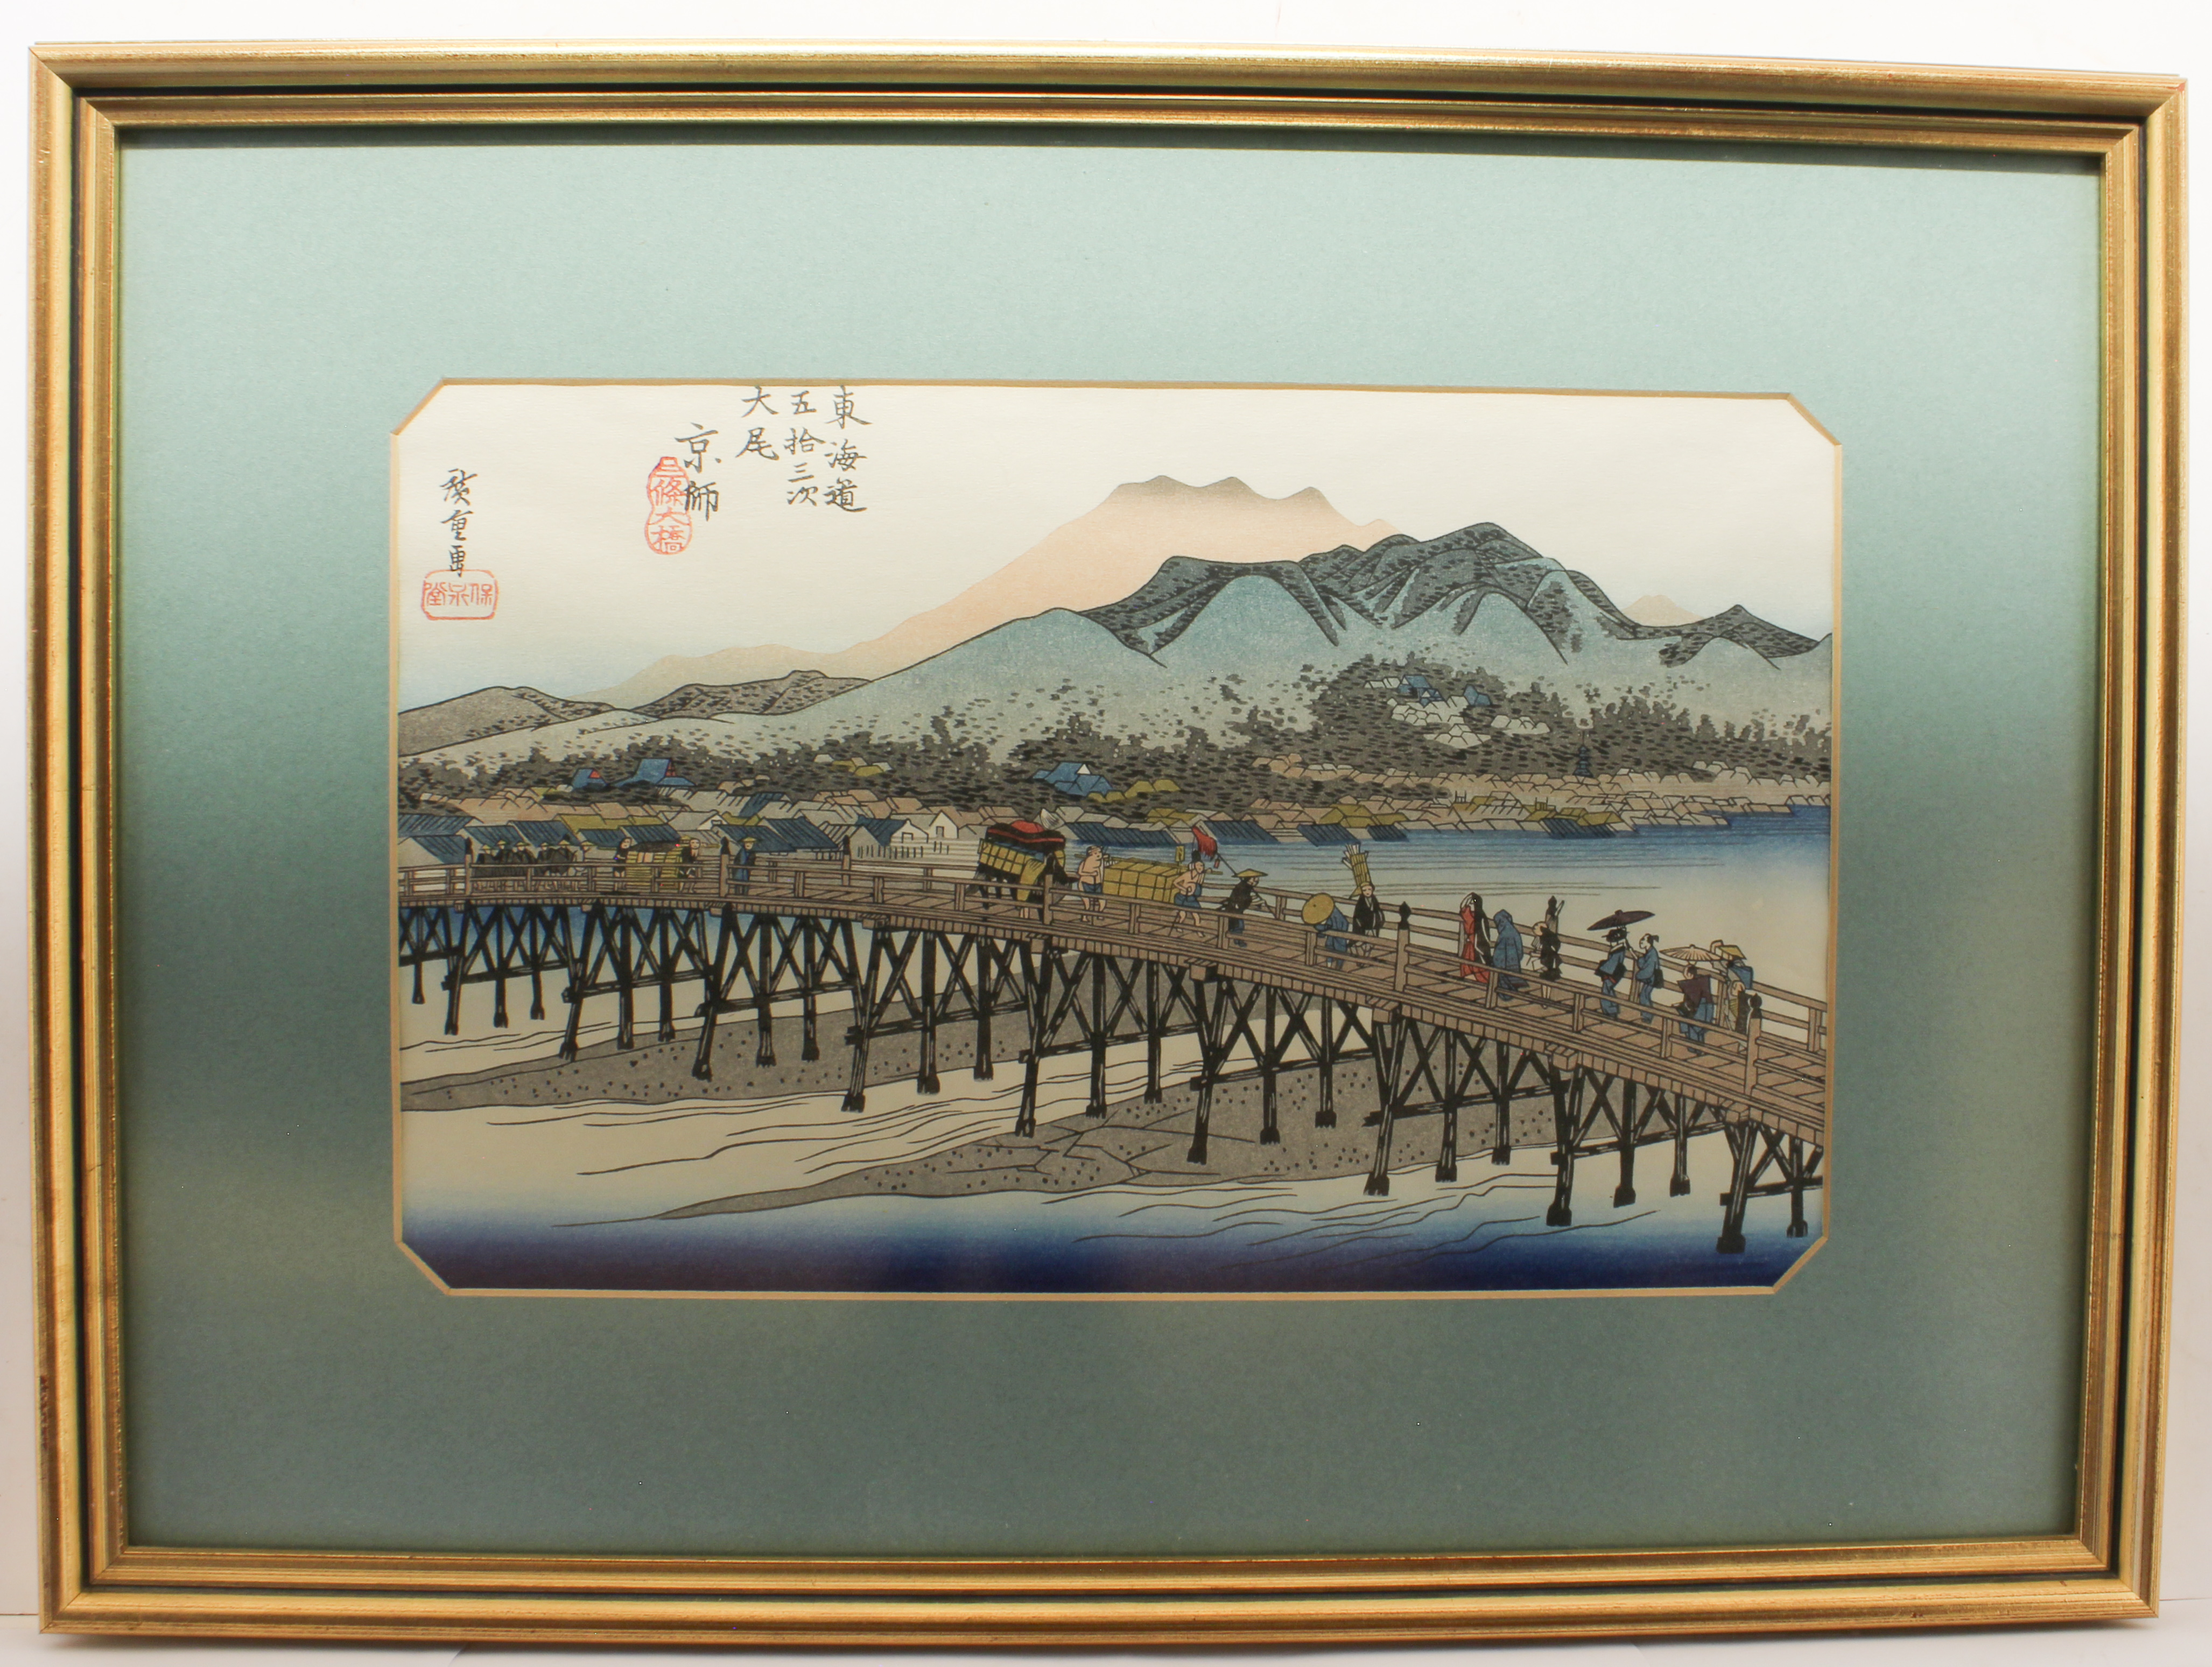 Three Japanese woodblock prints - 20th century after originals by Ando Hiroshige, framed and glazed, - Image 2 of 5